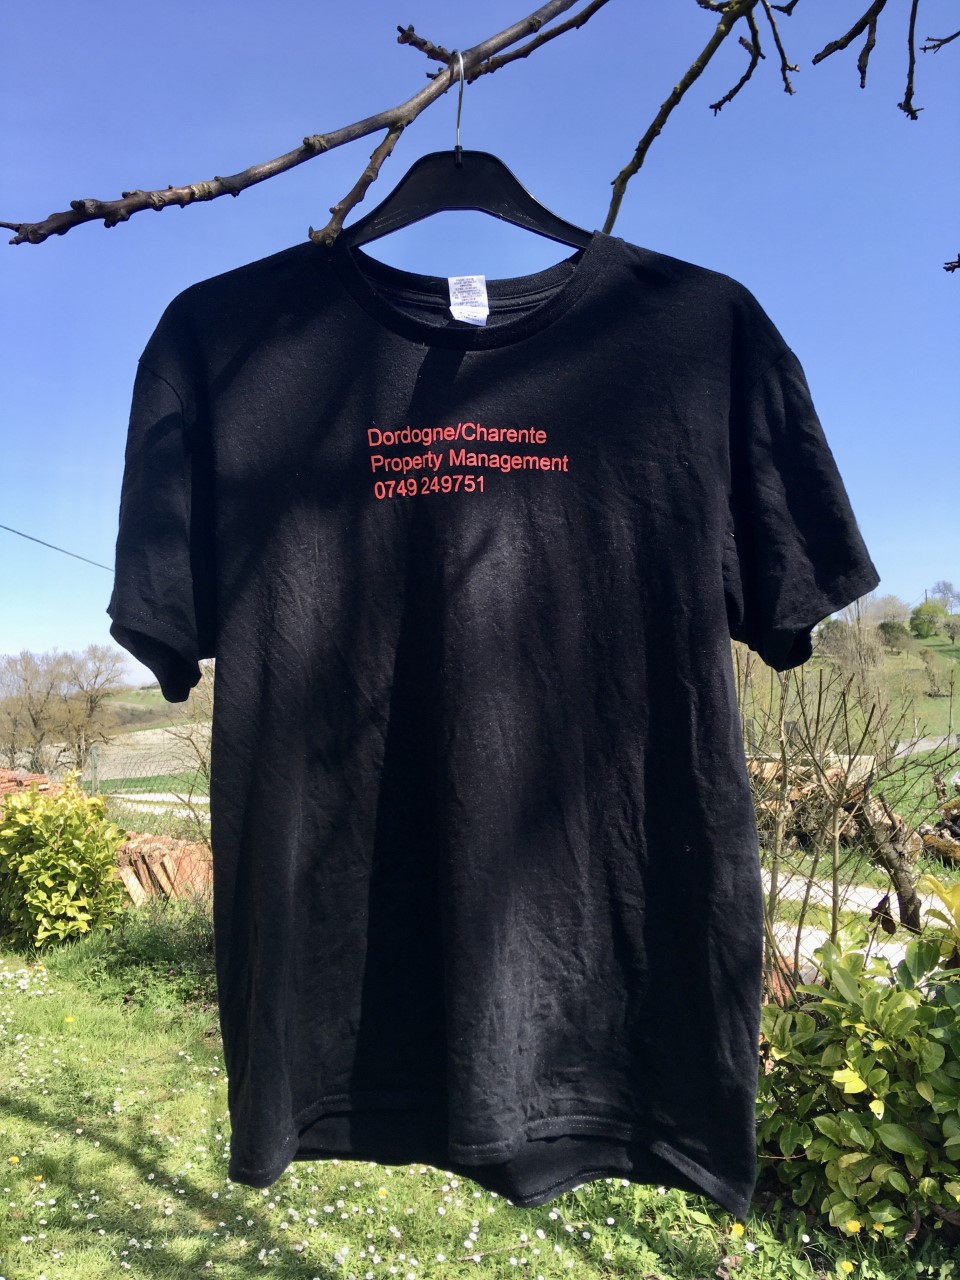 Getting the branding right with Printcious. The black tshirt with red writing. It is hung up on a branch of a tree overlooking countryside